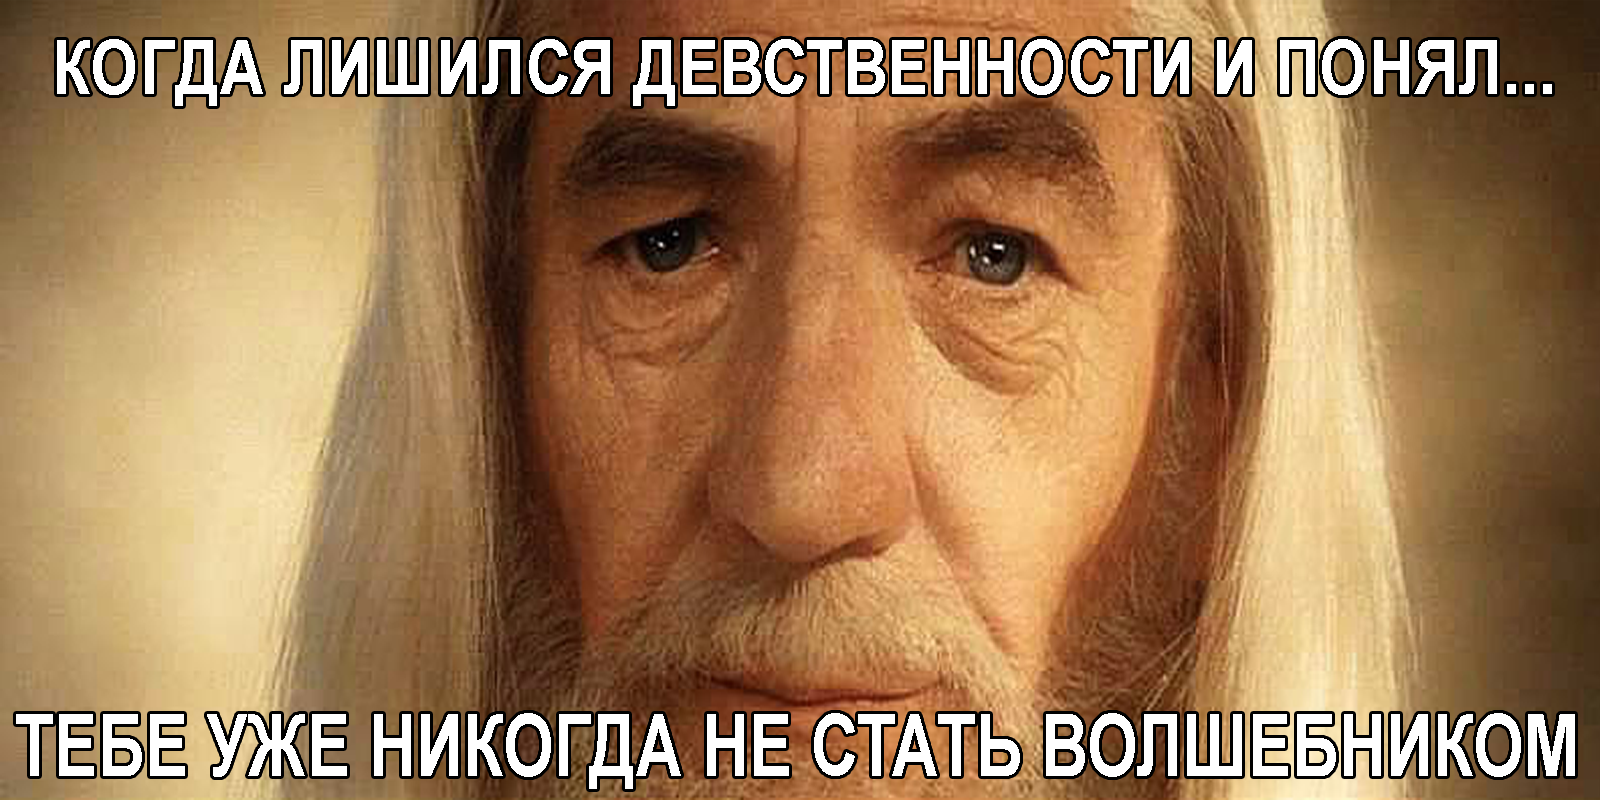 Tragedy - Lord of the Rings, Gandalf, Wizards, Adulthood, Wizard